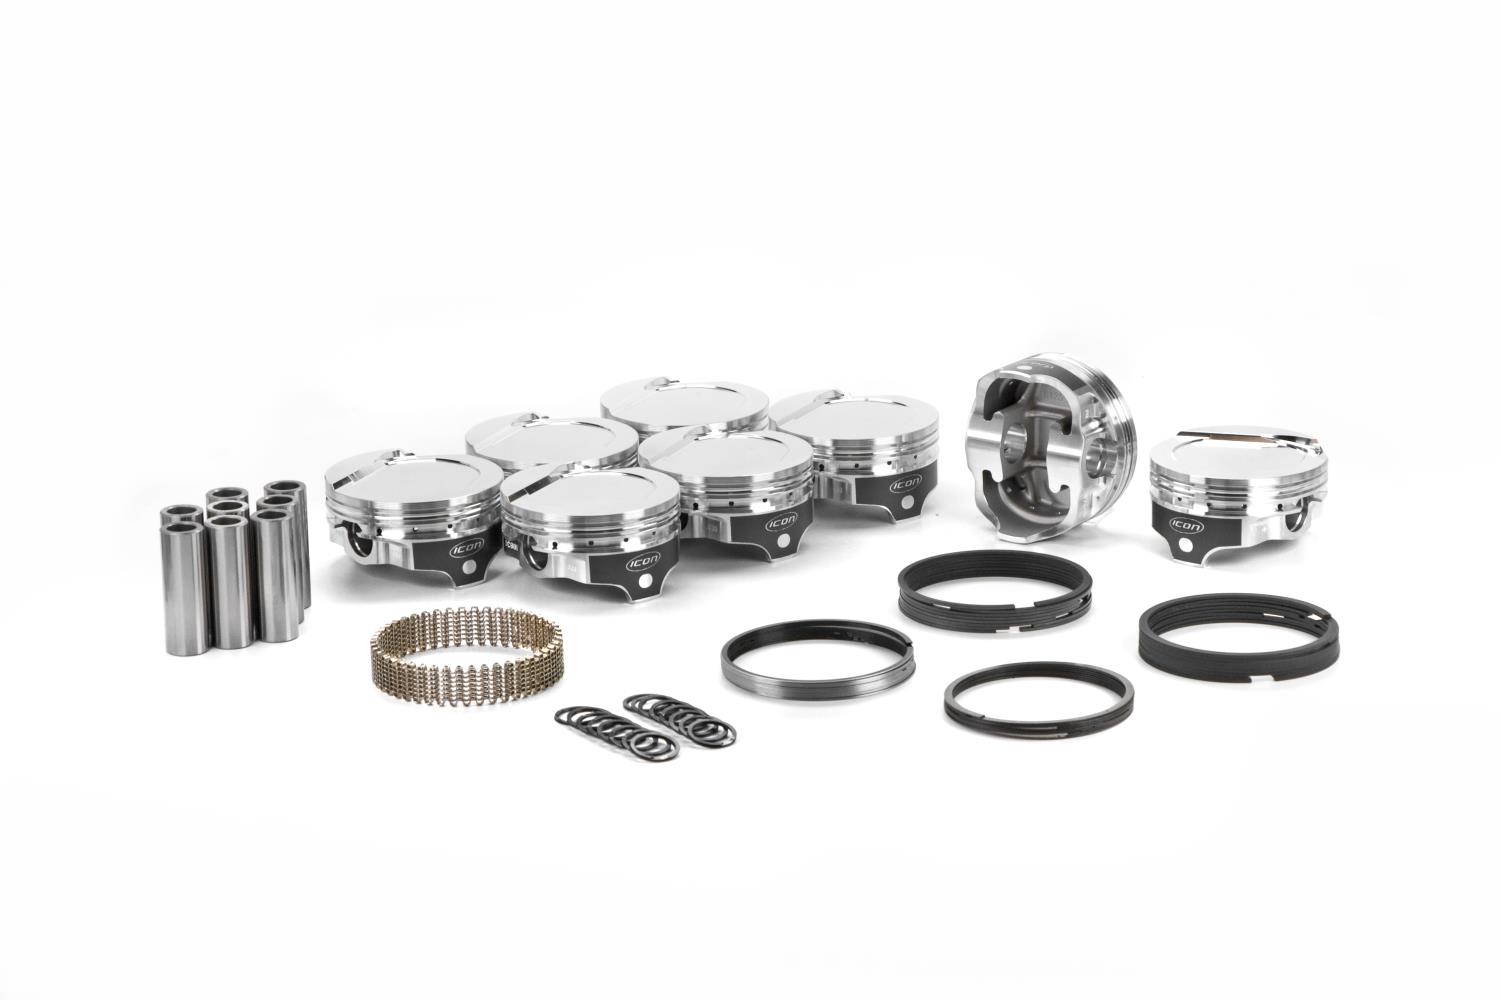 ICON Forged Single Piston - Ford 377C Rod 6.125 Step Dish 24cc 1V or Ford 402C Rod 6.000 Step Dish 24cc 1V